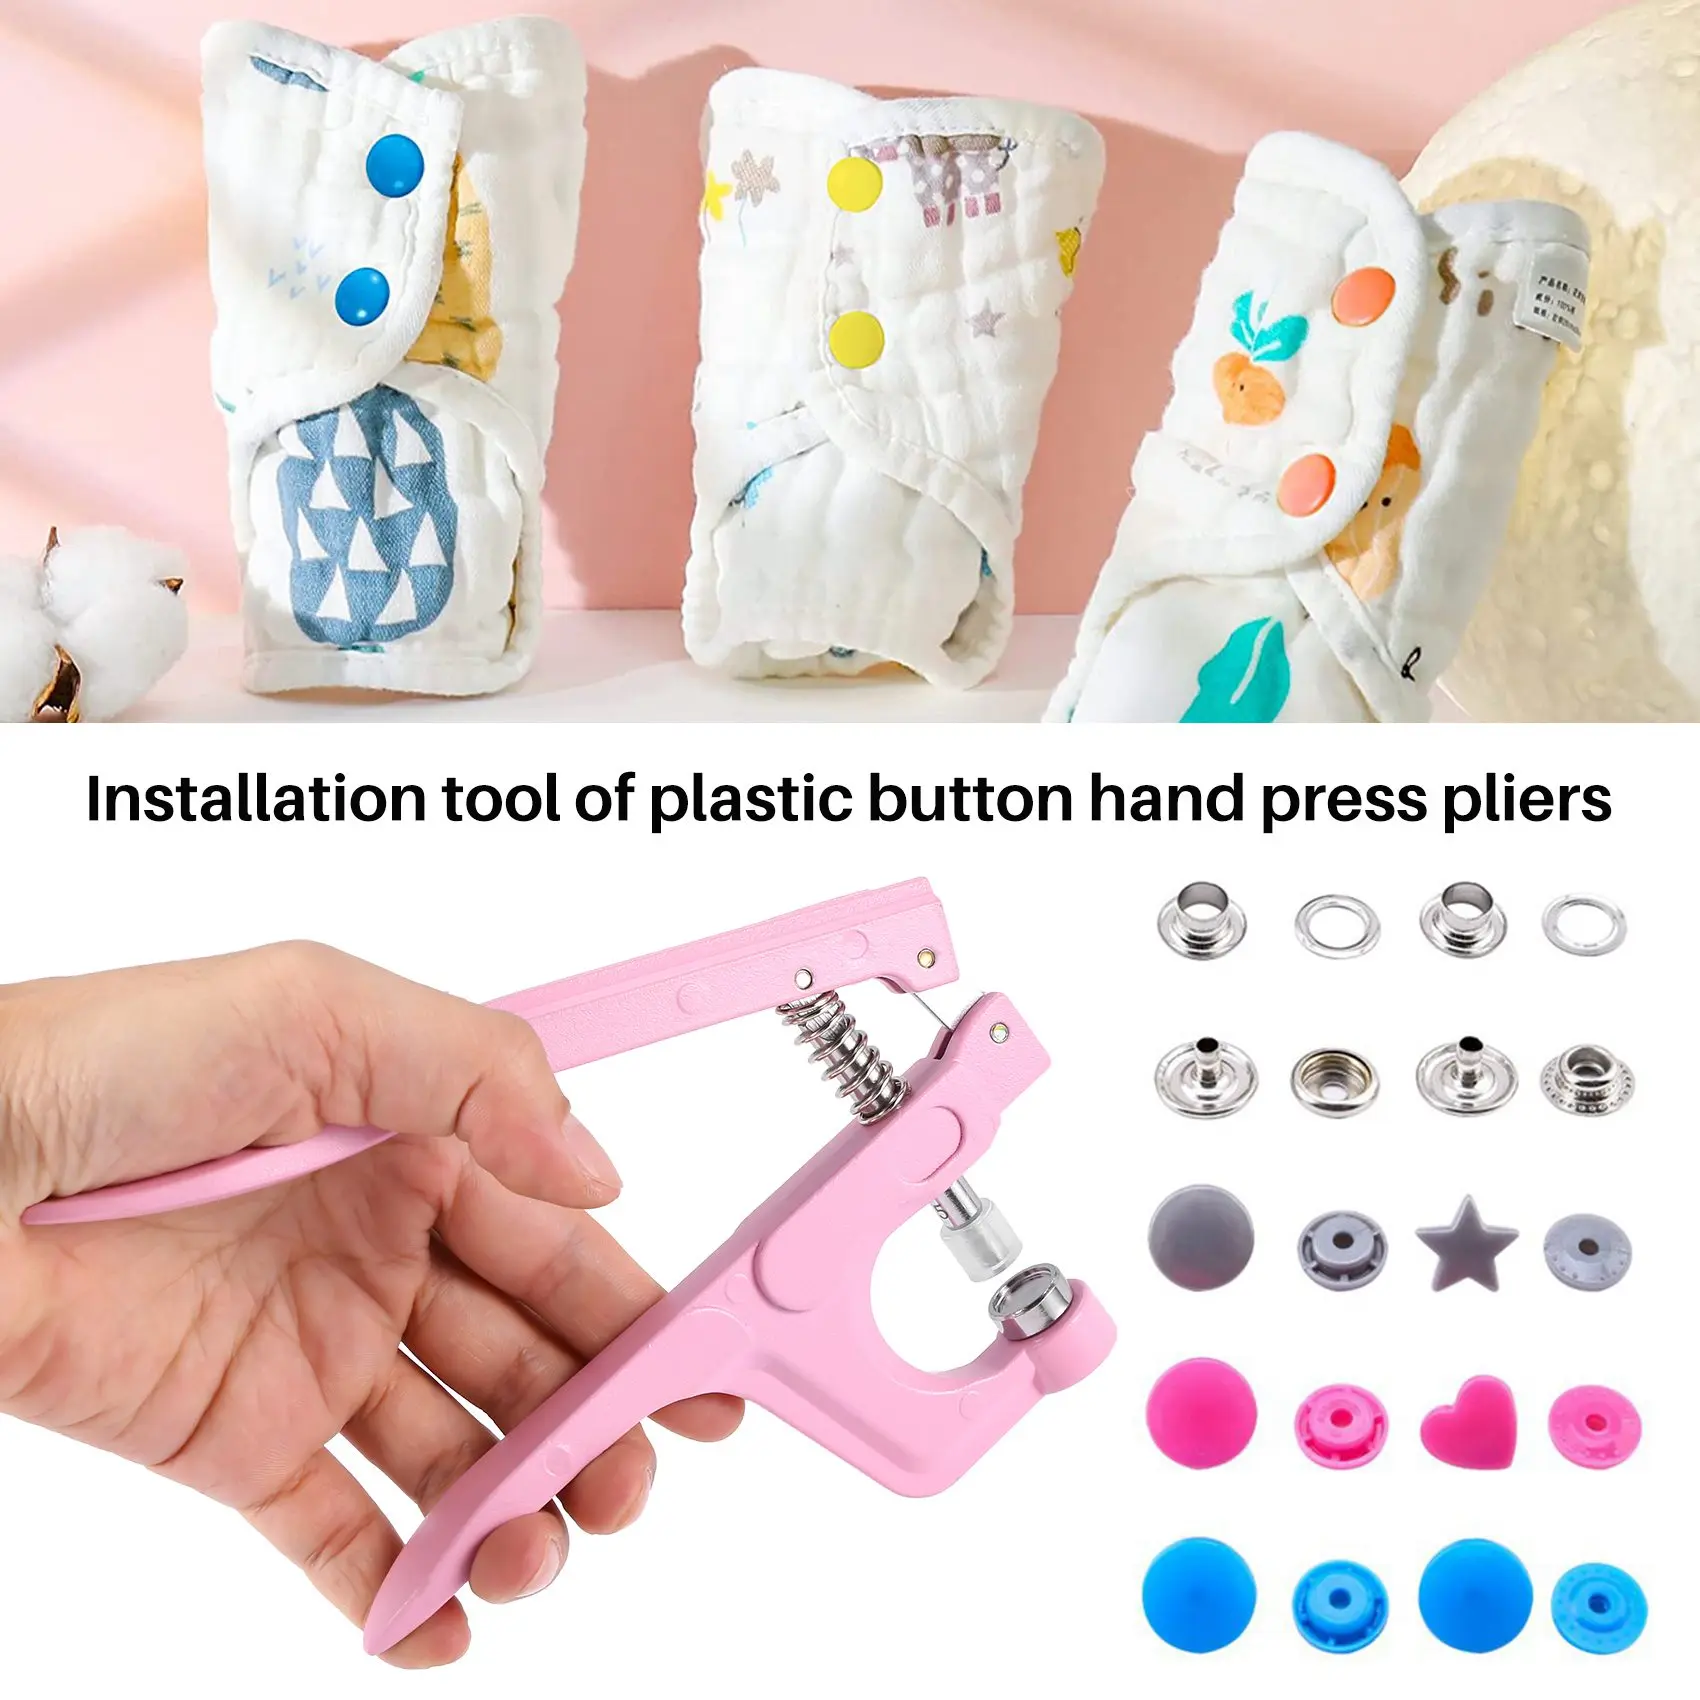 

Snaps Fasteners Kit, Snap Buttons T5 with Installment Tool Kit Colorful Plastic Snaps for Sewing Clothing Crafting